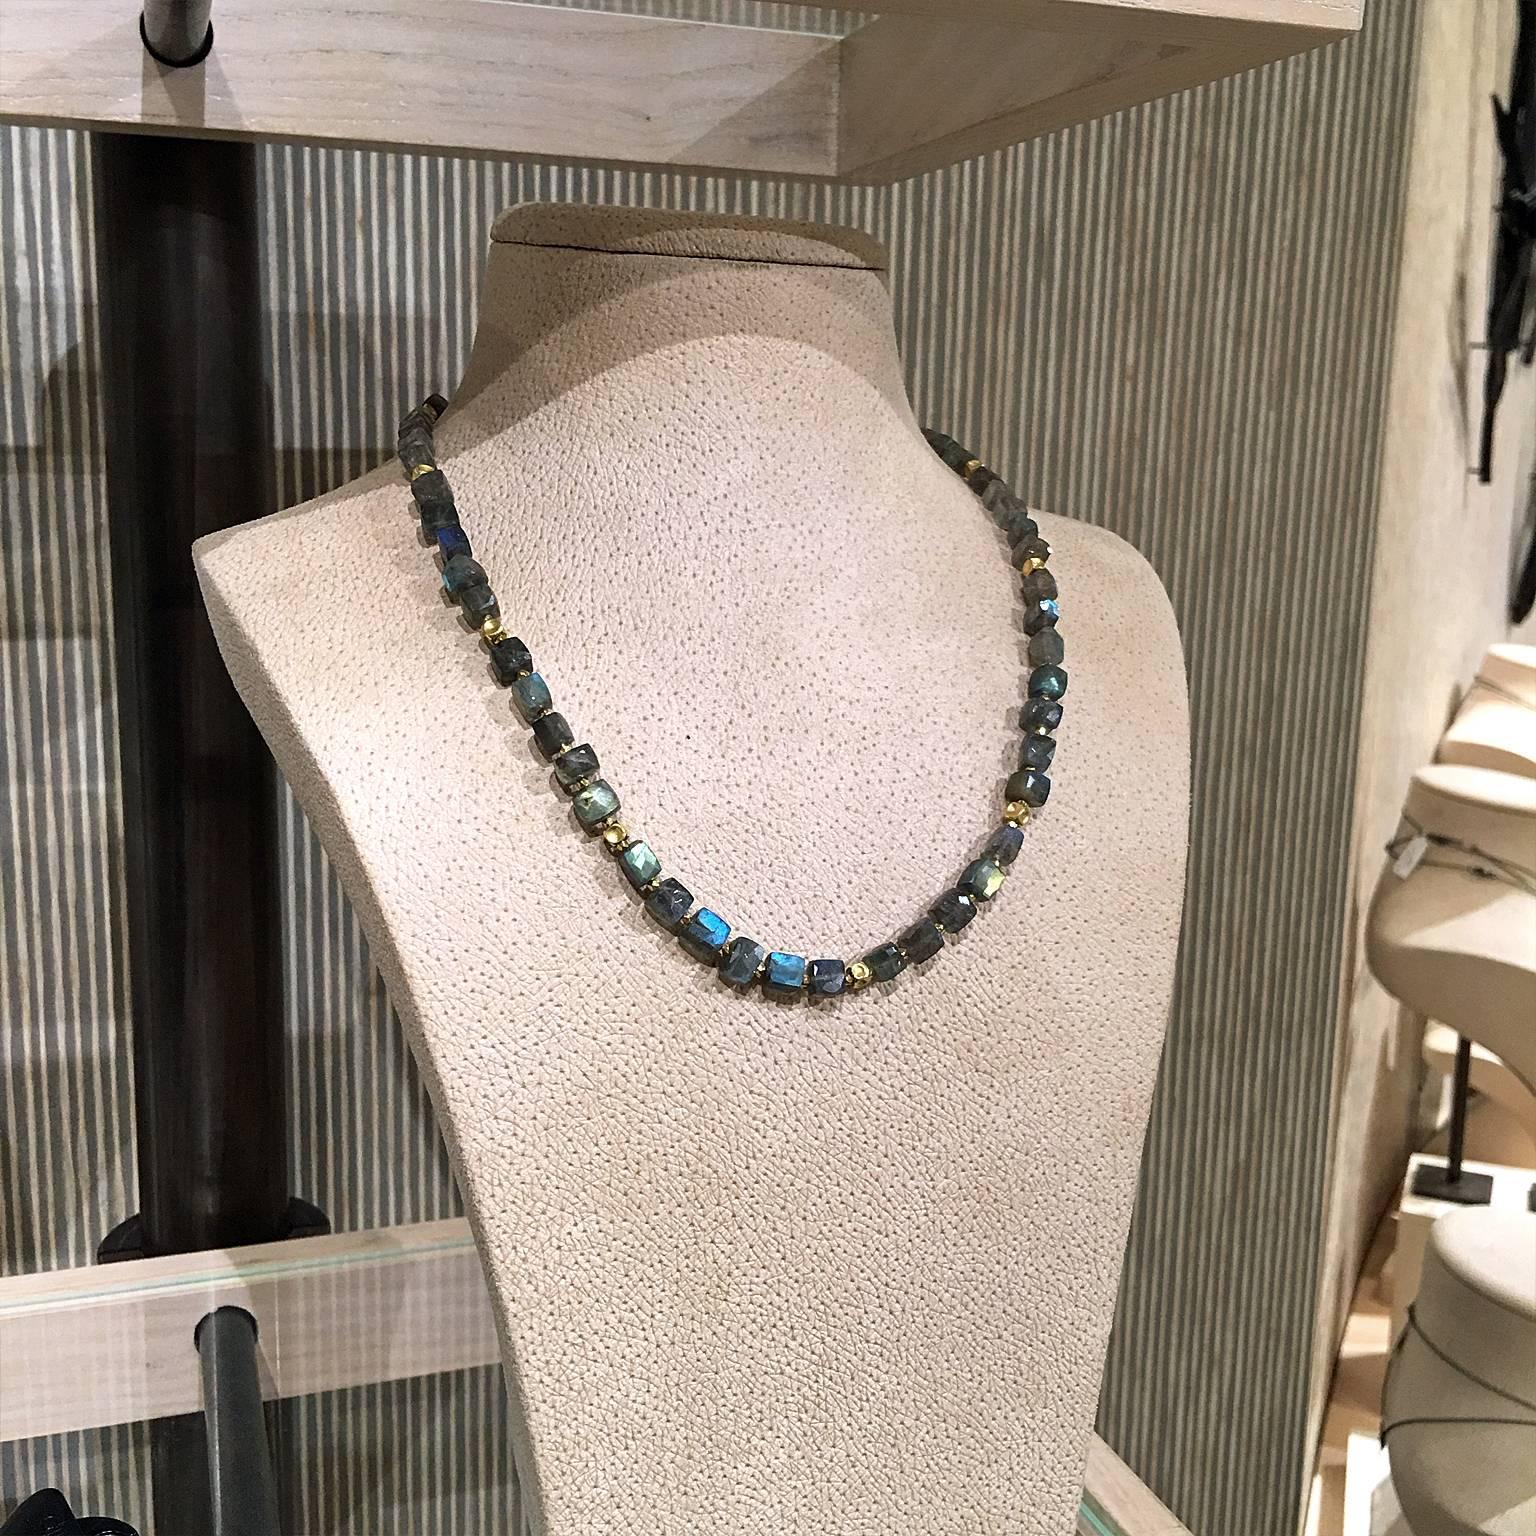 One of a Kind Necklace handcrafted by award winning jewelry maker Barbara Heinrich showcasing matched labradorite cubes with strong, colorful flash. The gemstones are individually separated by matte-finished 18k yellow gold handmade faceted bead and